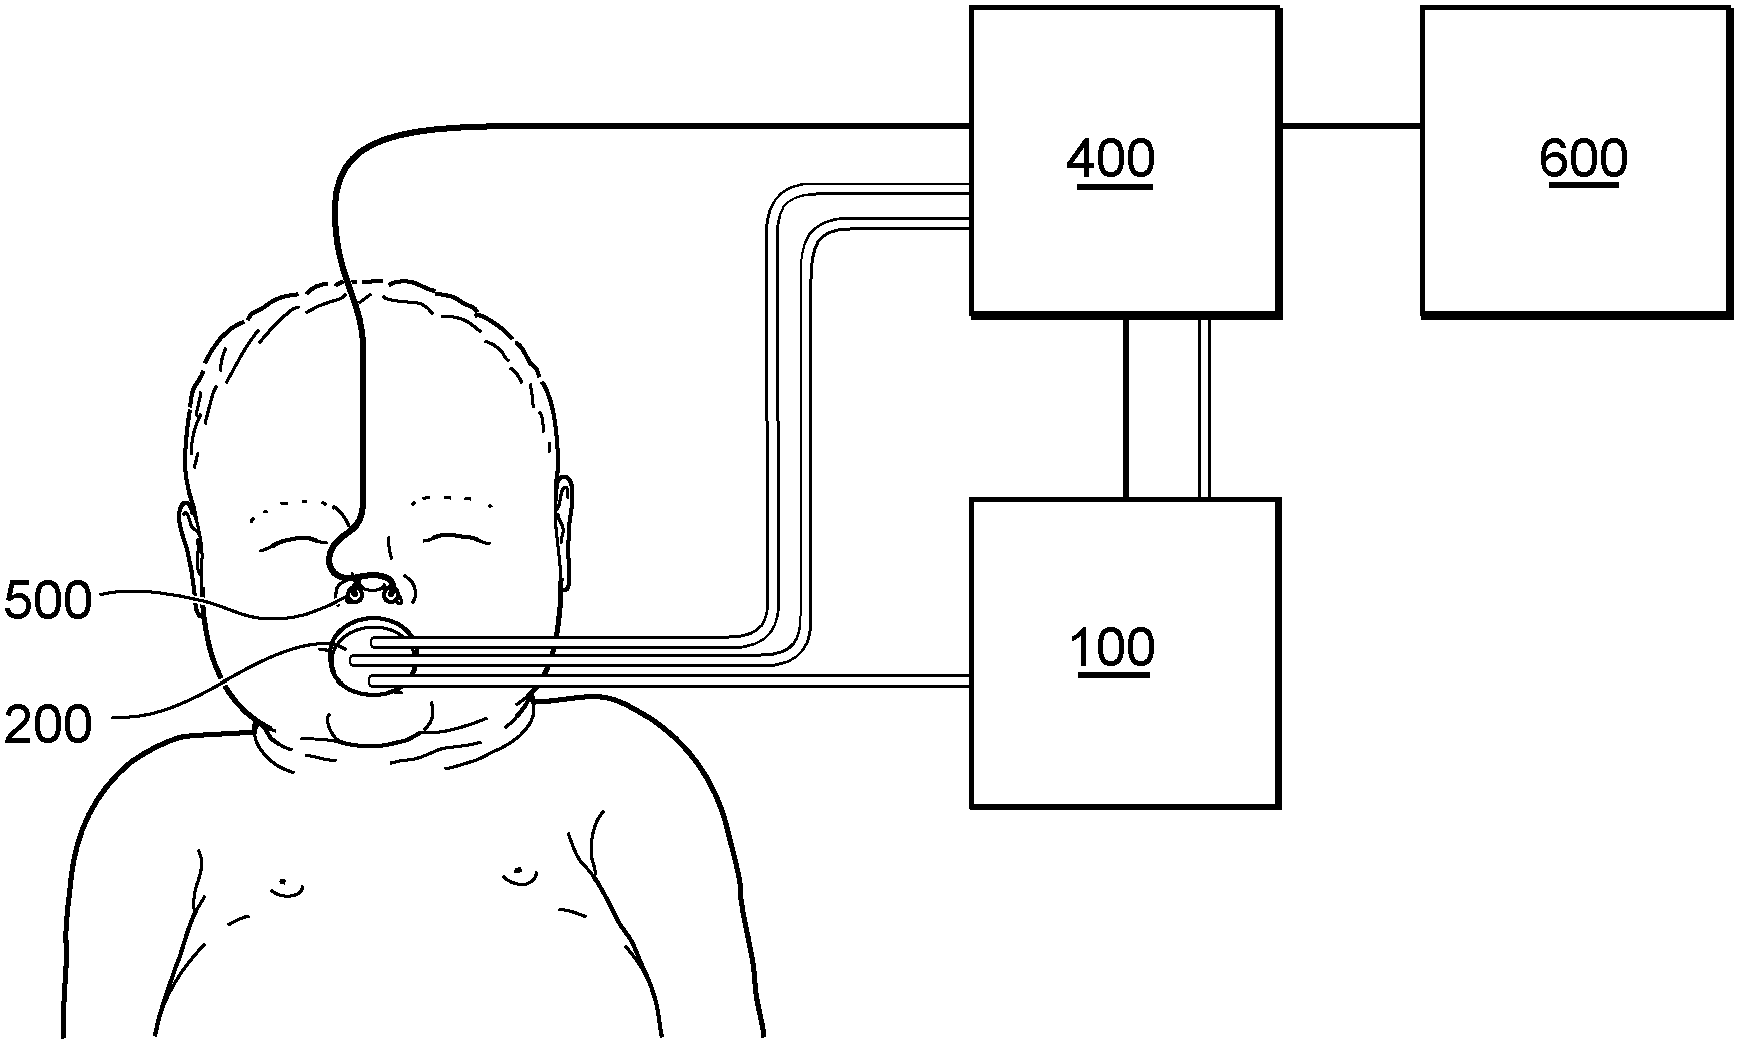 Apparatus and method for the collection of samples of exhaled air